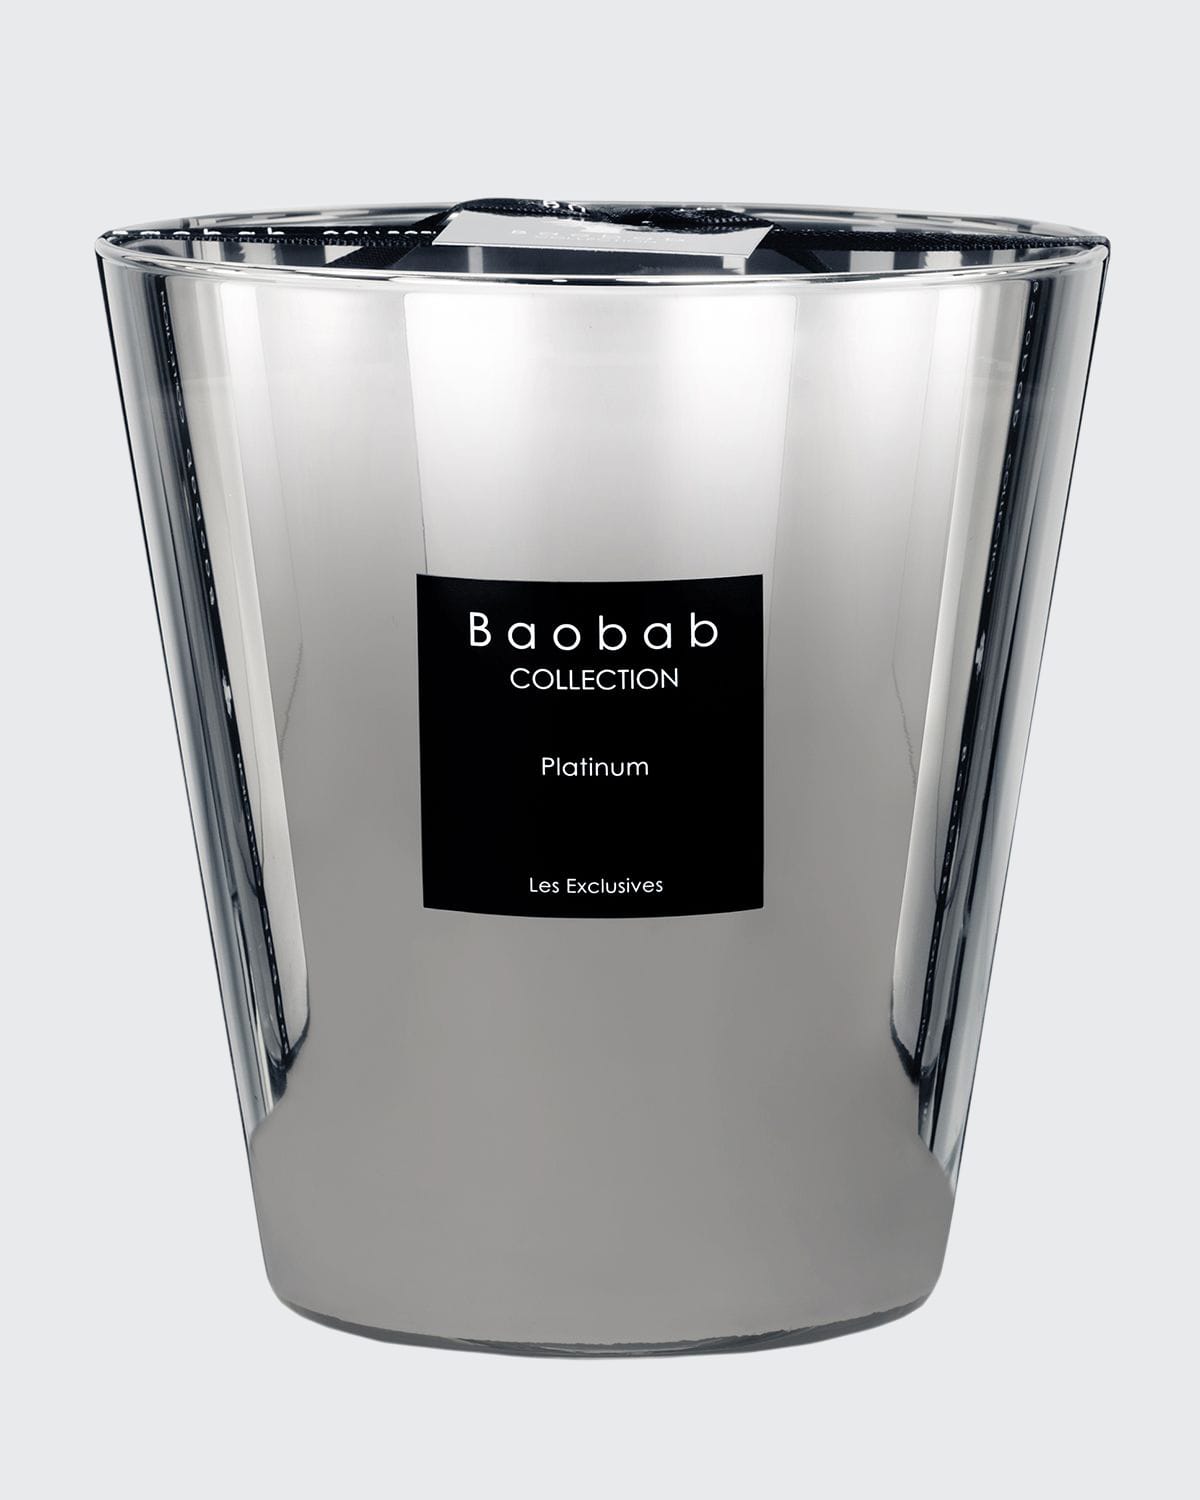 Baobab Collection Platinum Scented Candle, 6.3" In Metallic